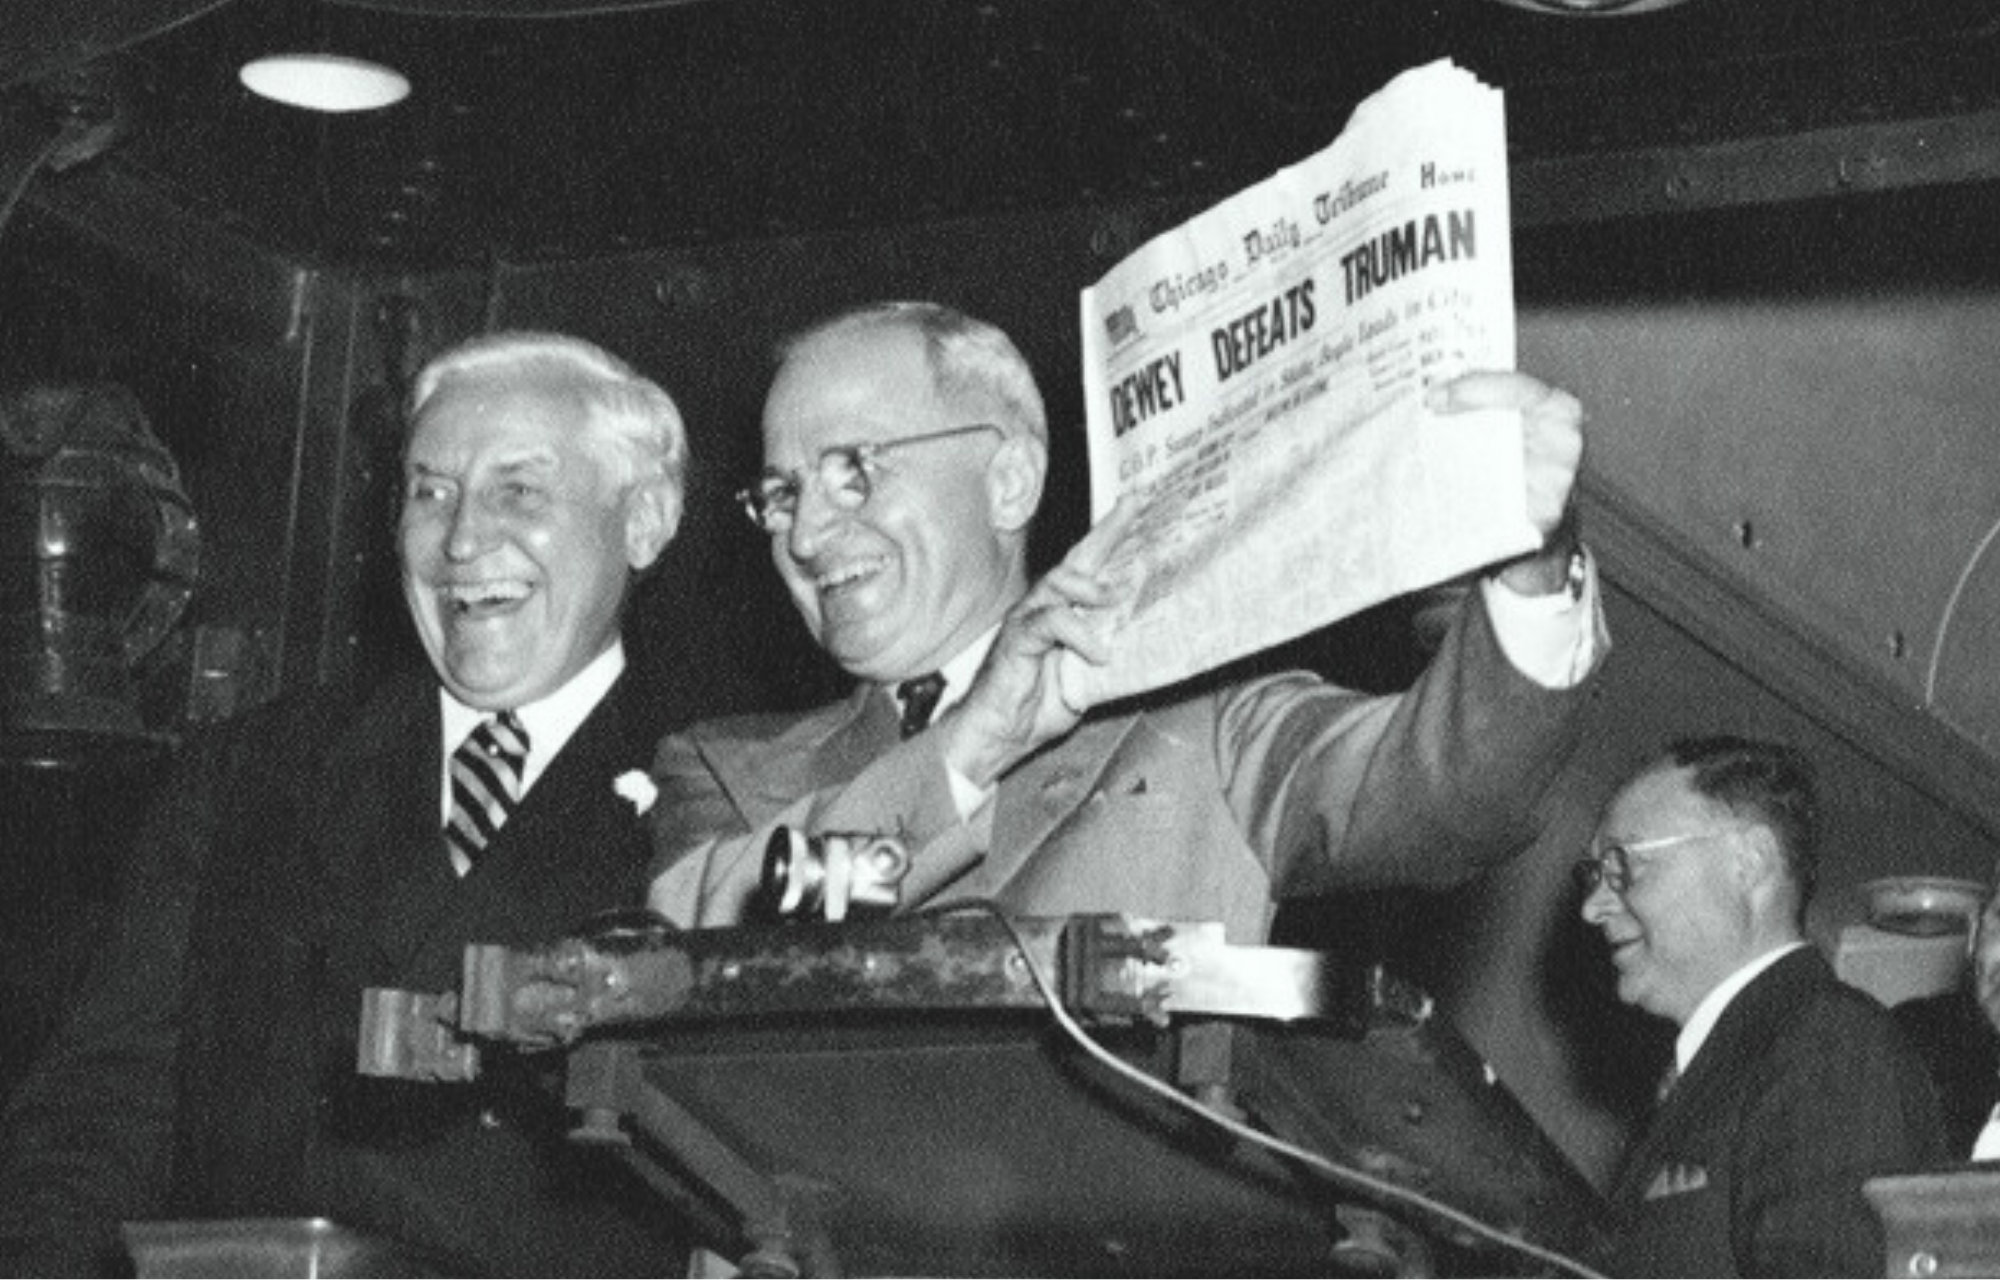 At St. Louis Union Station, postmaster Bernard Dickmann (left) stands next to newly elected President Truman as he holds up the famous Chicago Tribune newspaper headline "Dewey Defeats Truman" (November 4, 1948). Courtesy Truman Library, photo 64-861